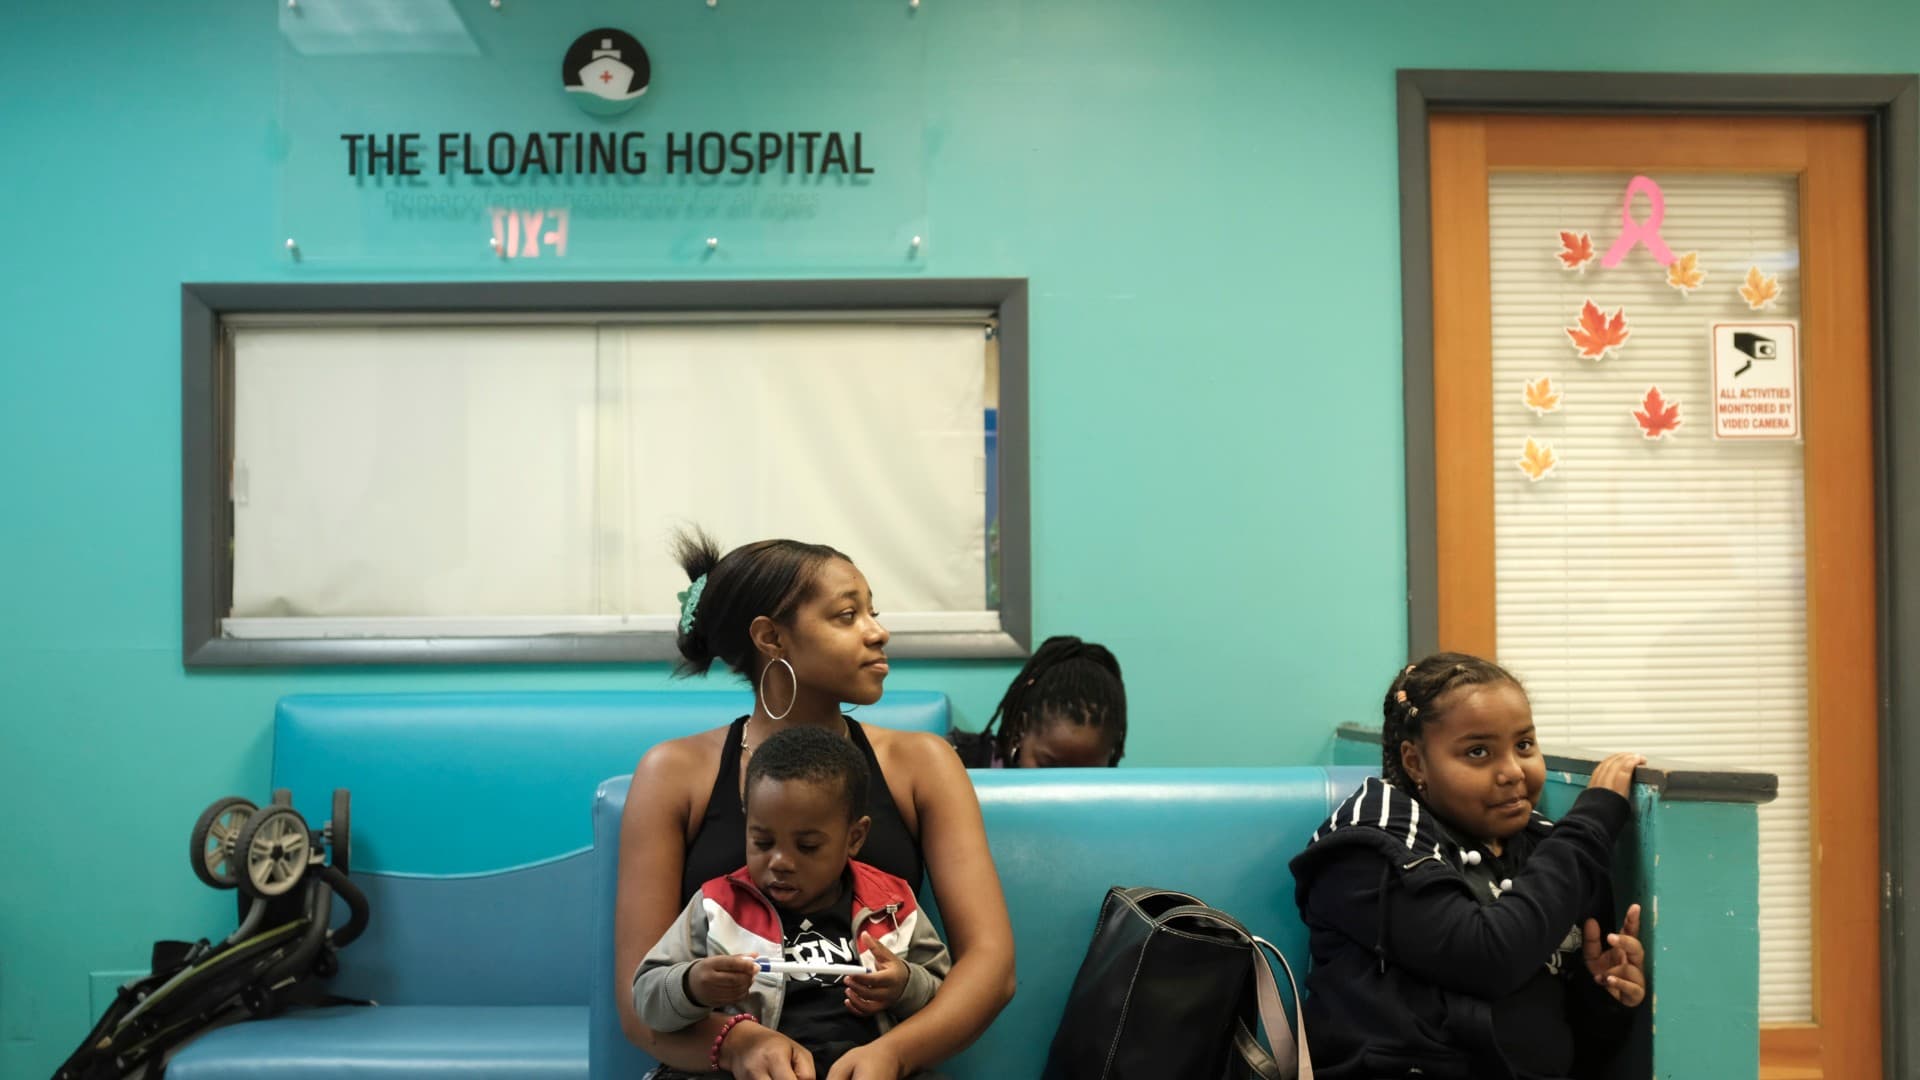 Featured image of patients in the waiting room